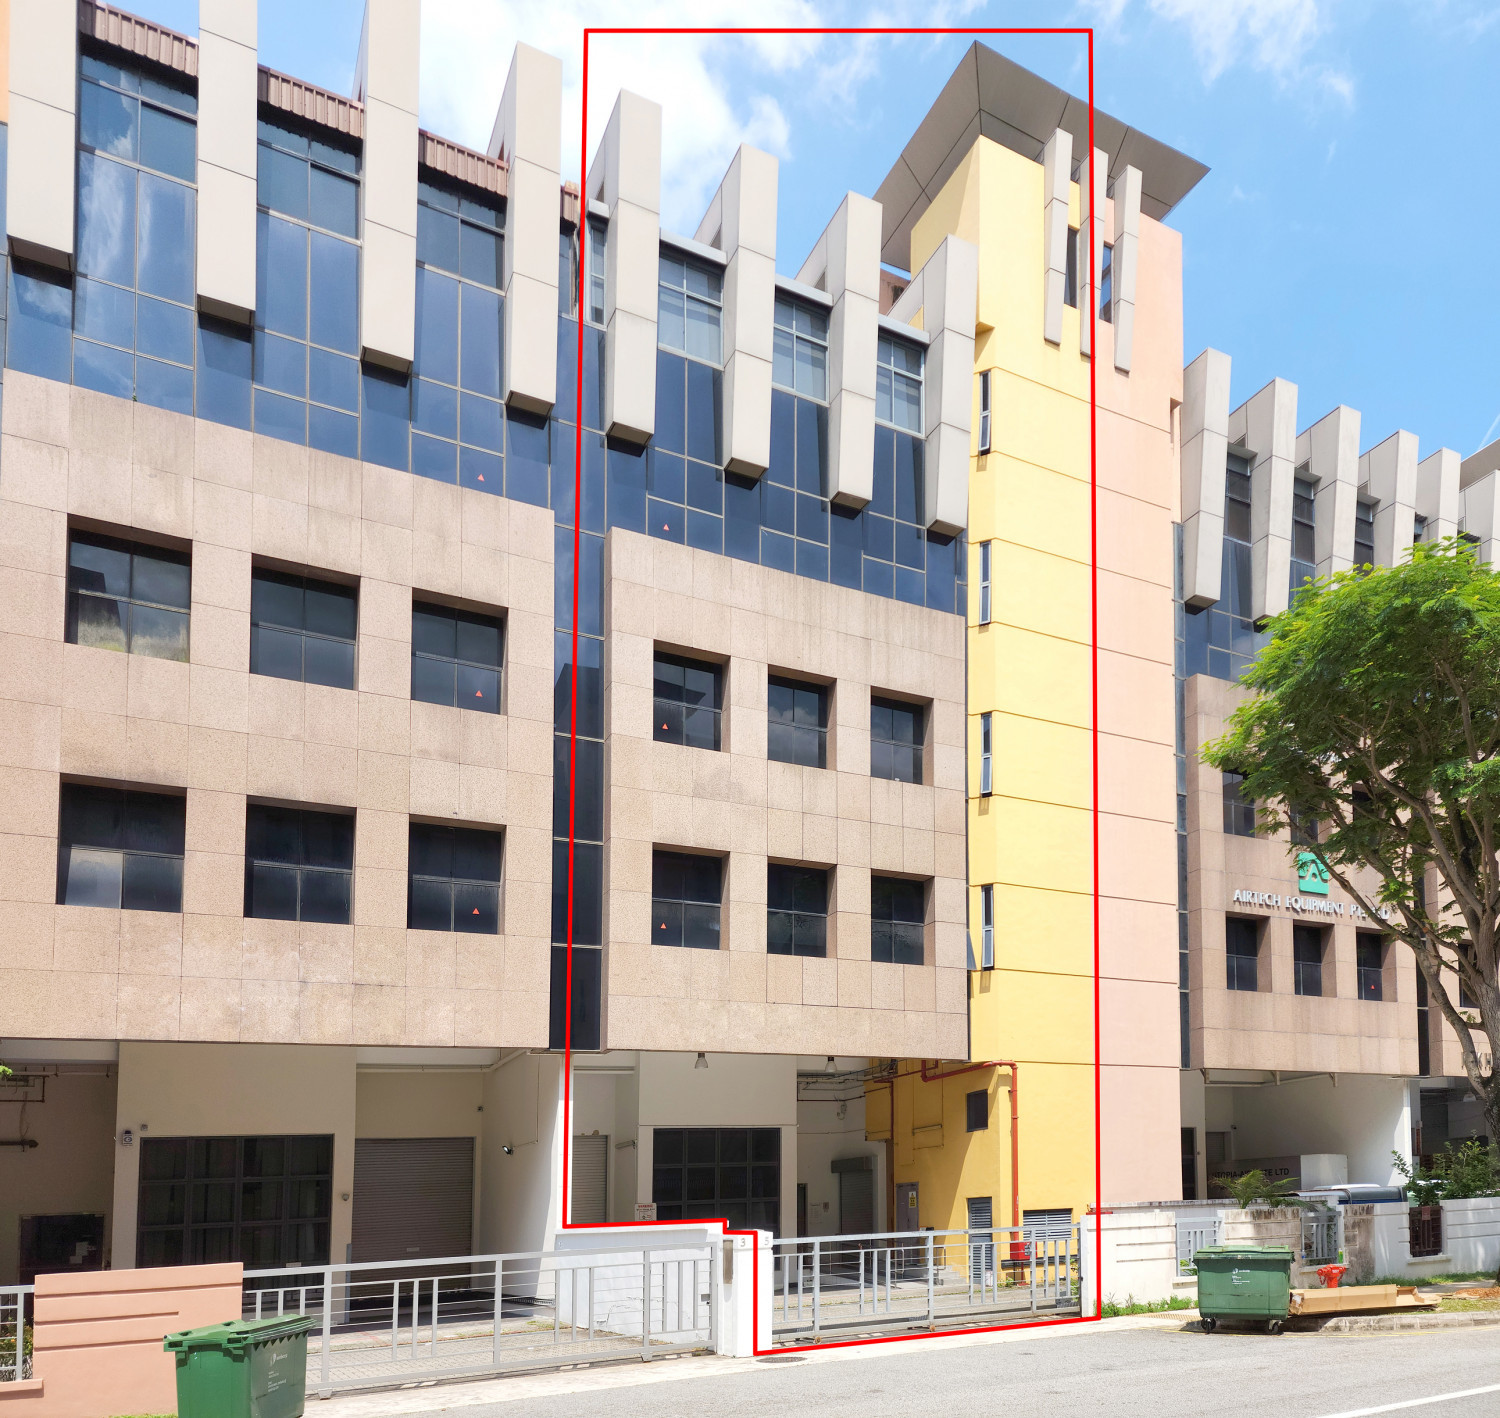 Industrial property at Kaki Bukit Place for sale at $5.35 mil - Property News